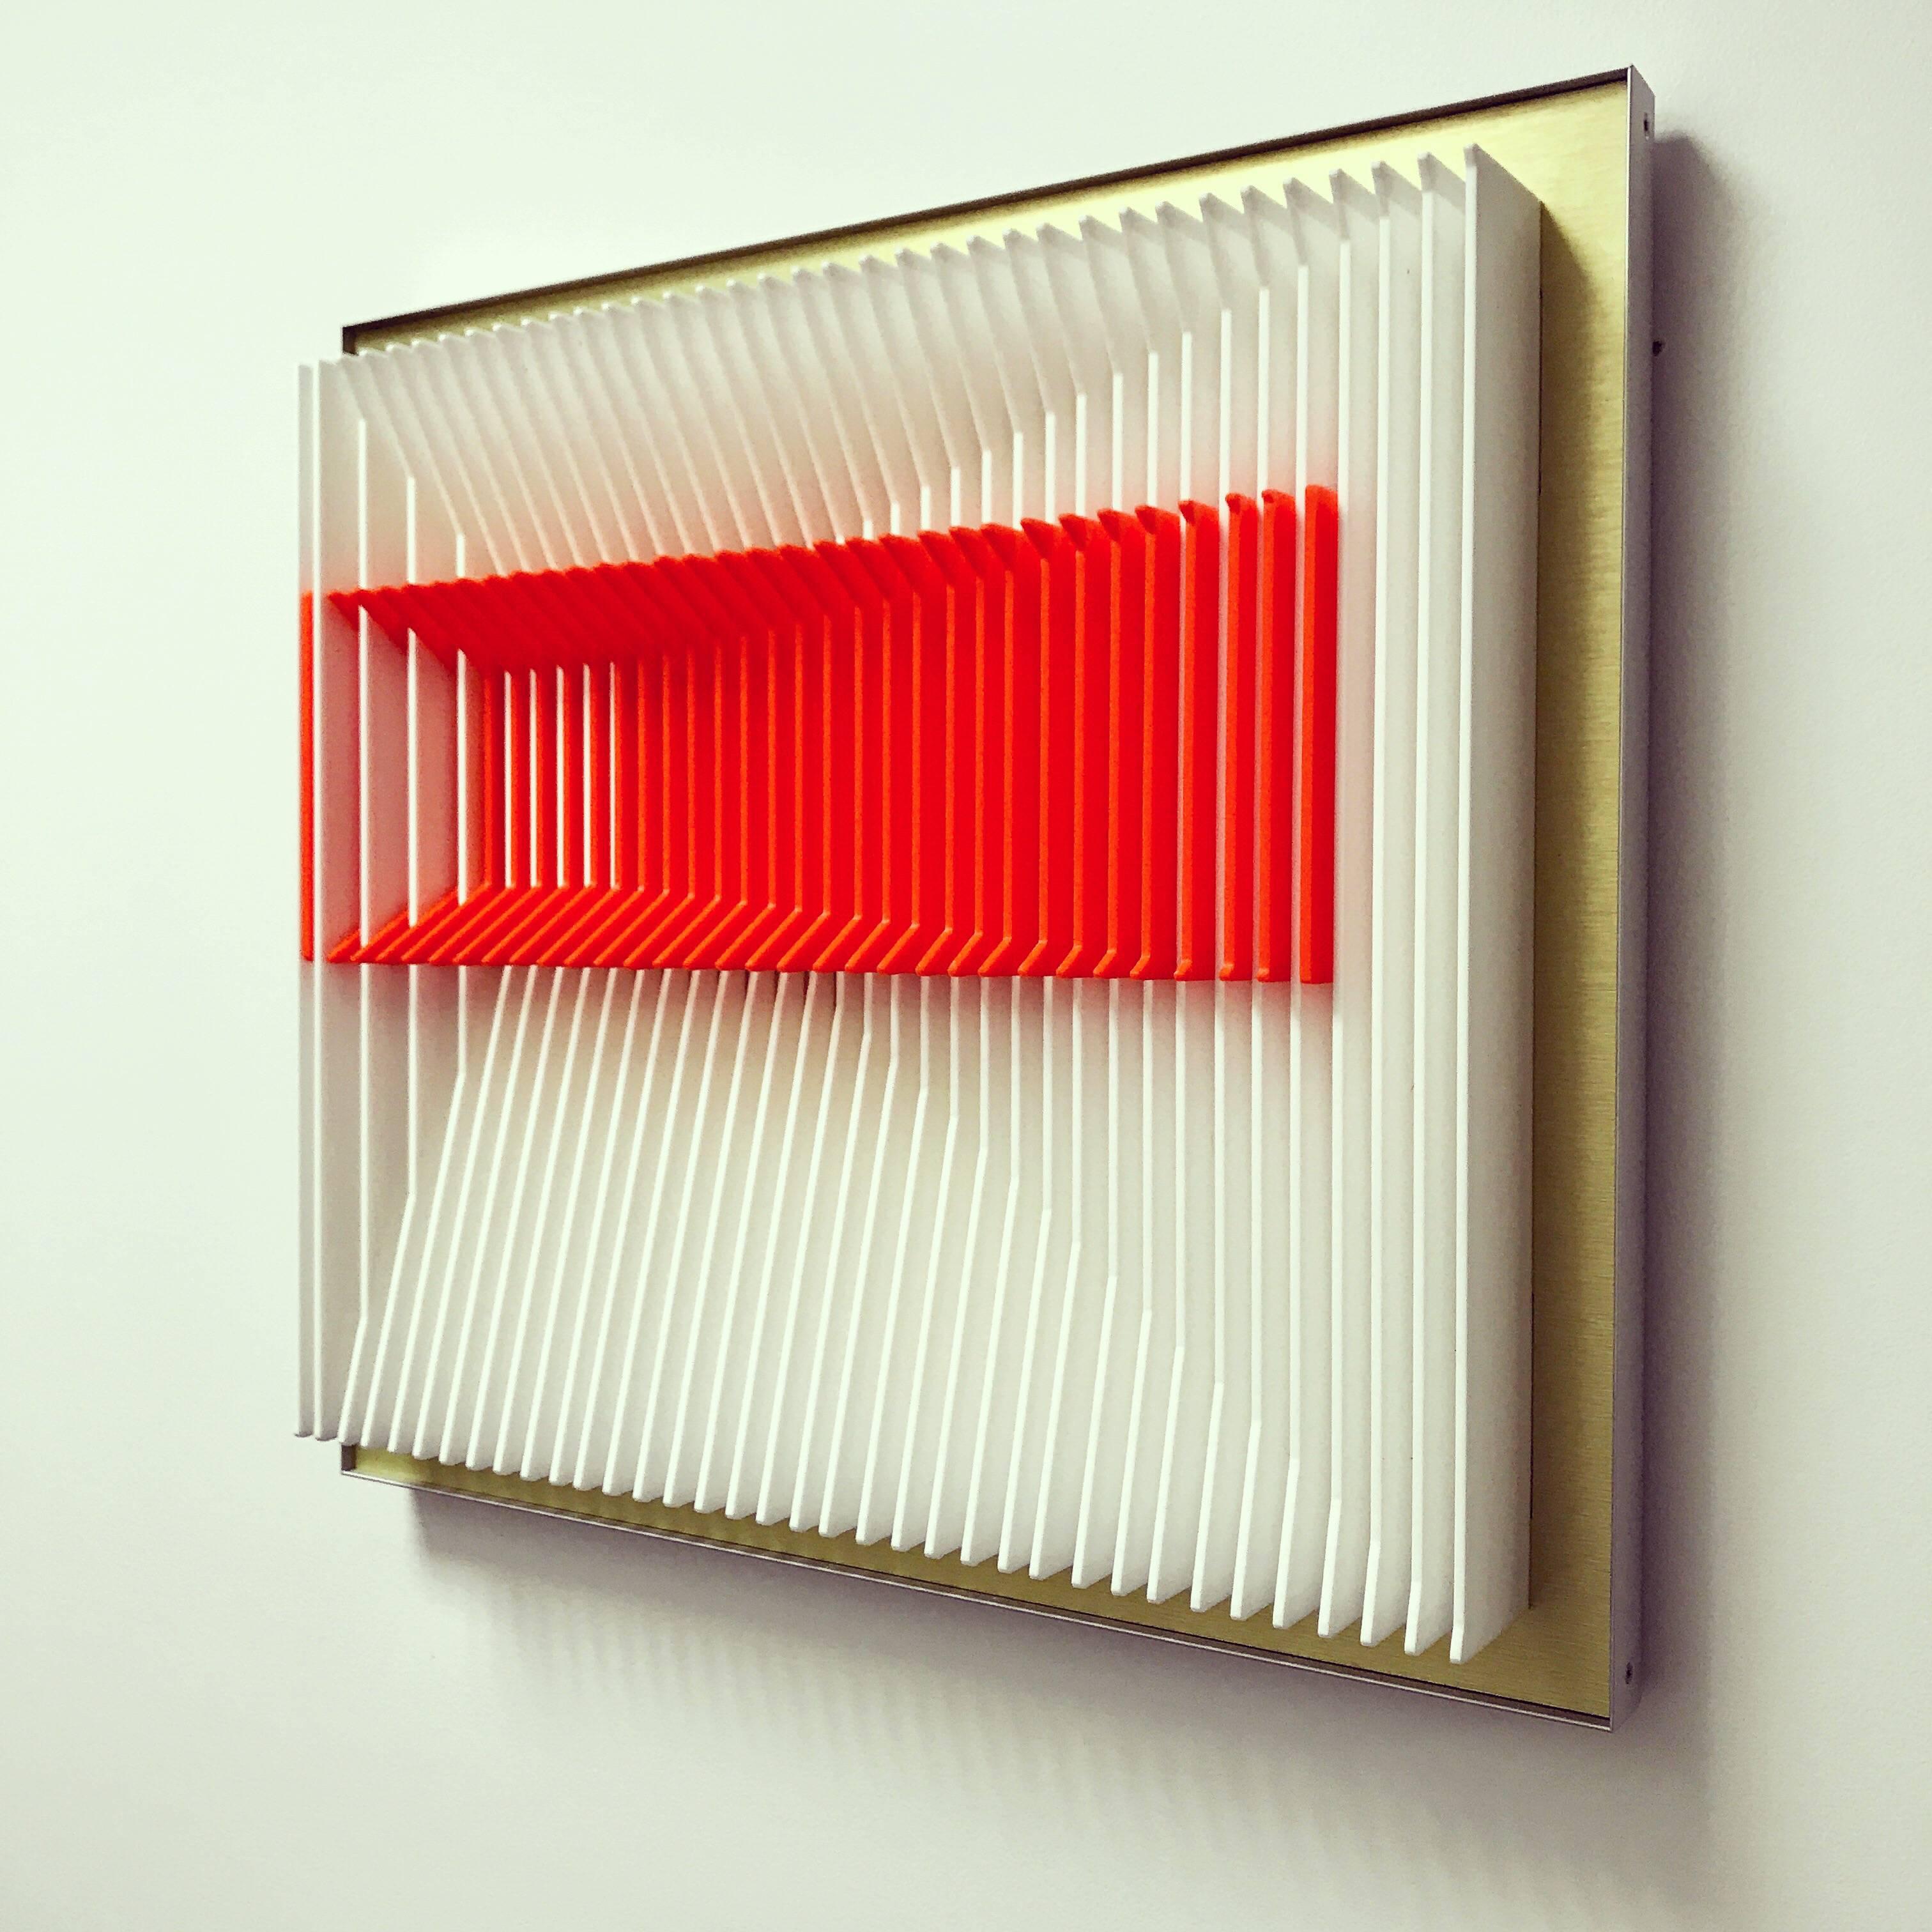 Jose Margulis Abstract Sculpture - J. Margulis - Orange Inclined - Kinetic wall sculpture 